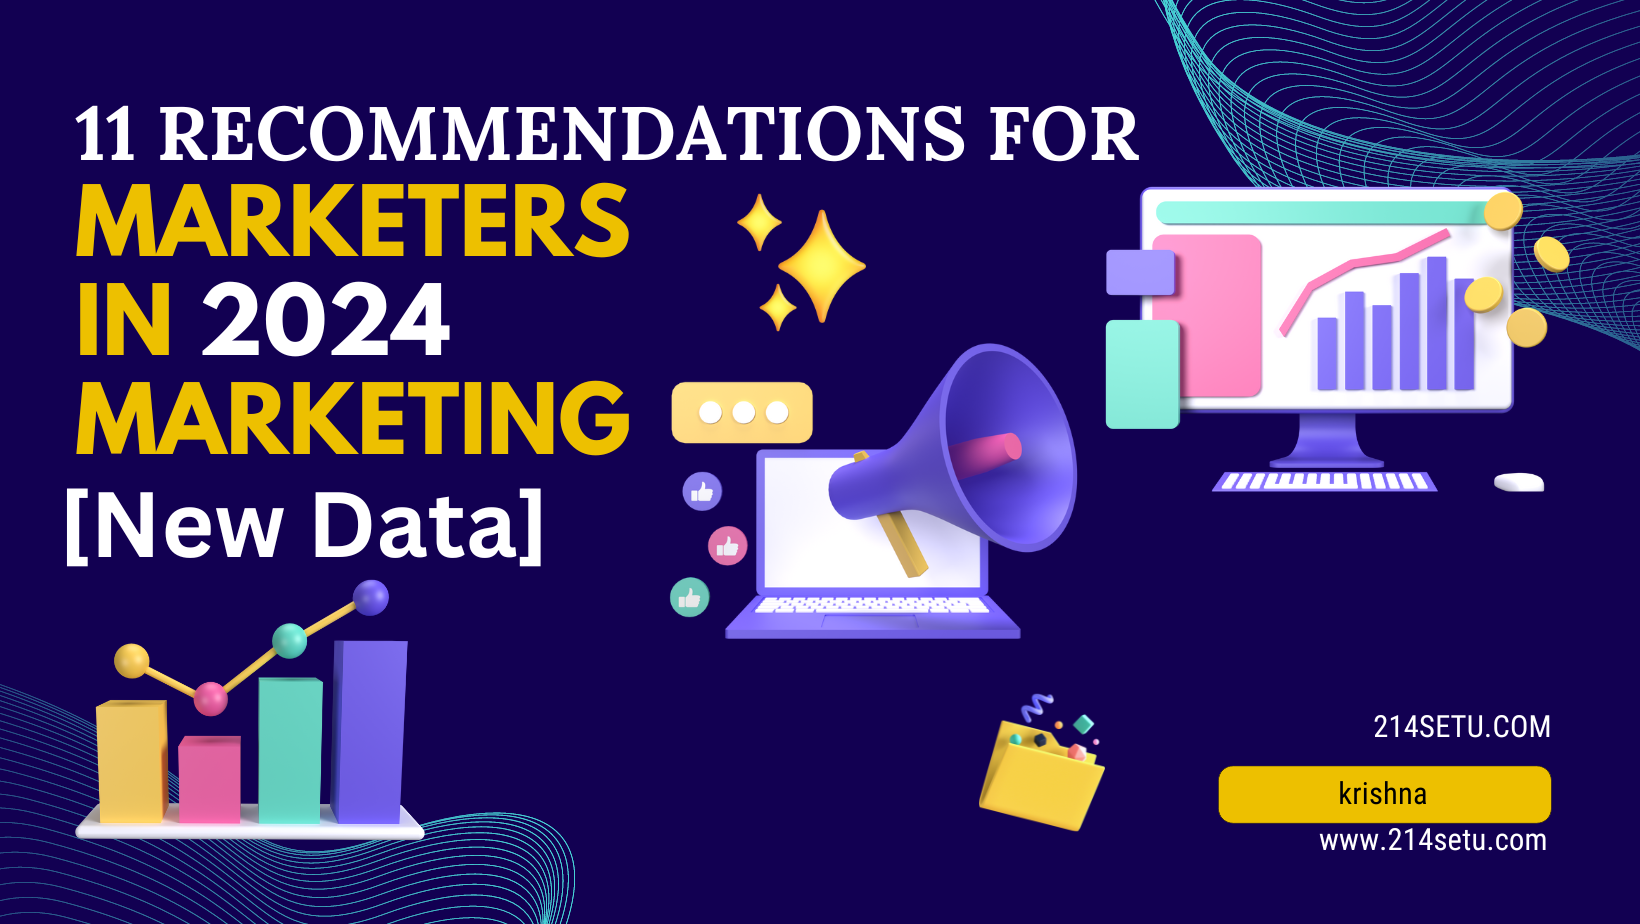 11 Recommendations for Marketers in 2024 marketing [New Data]